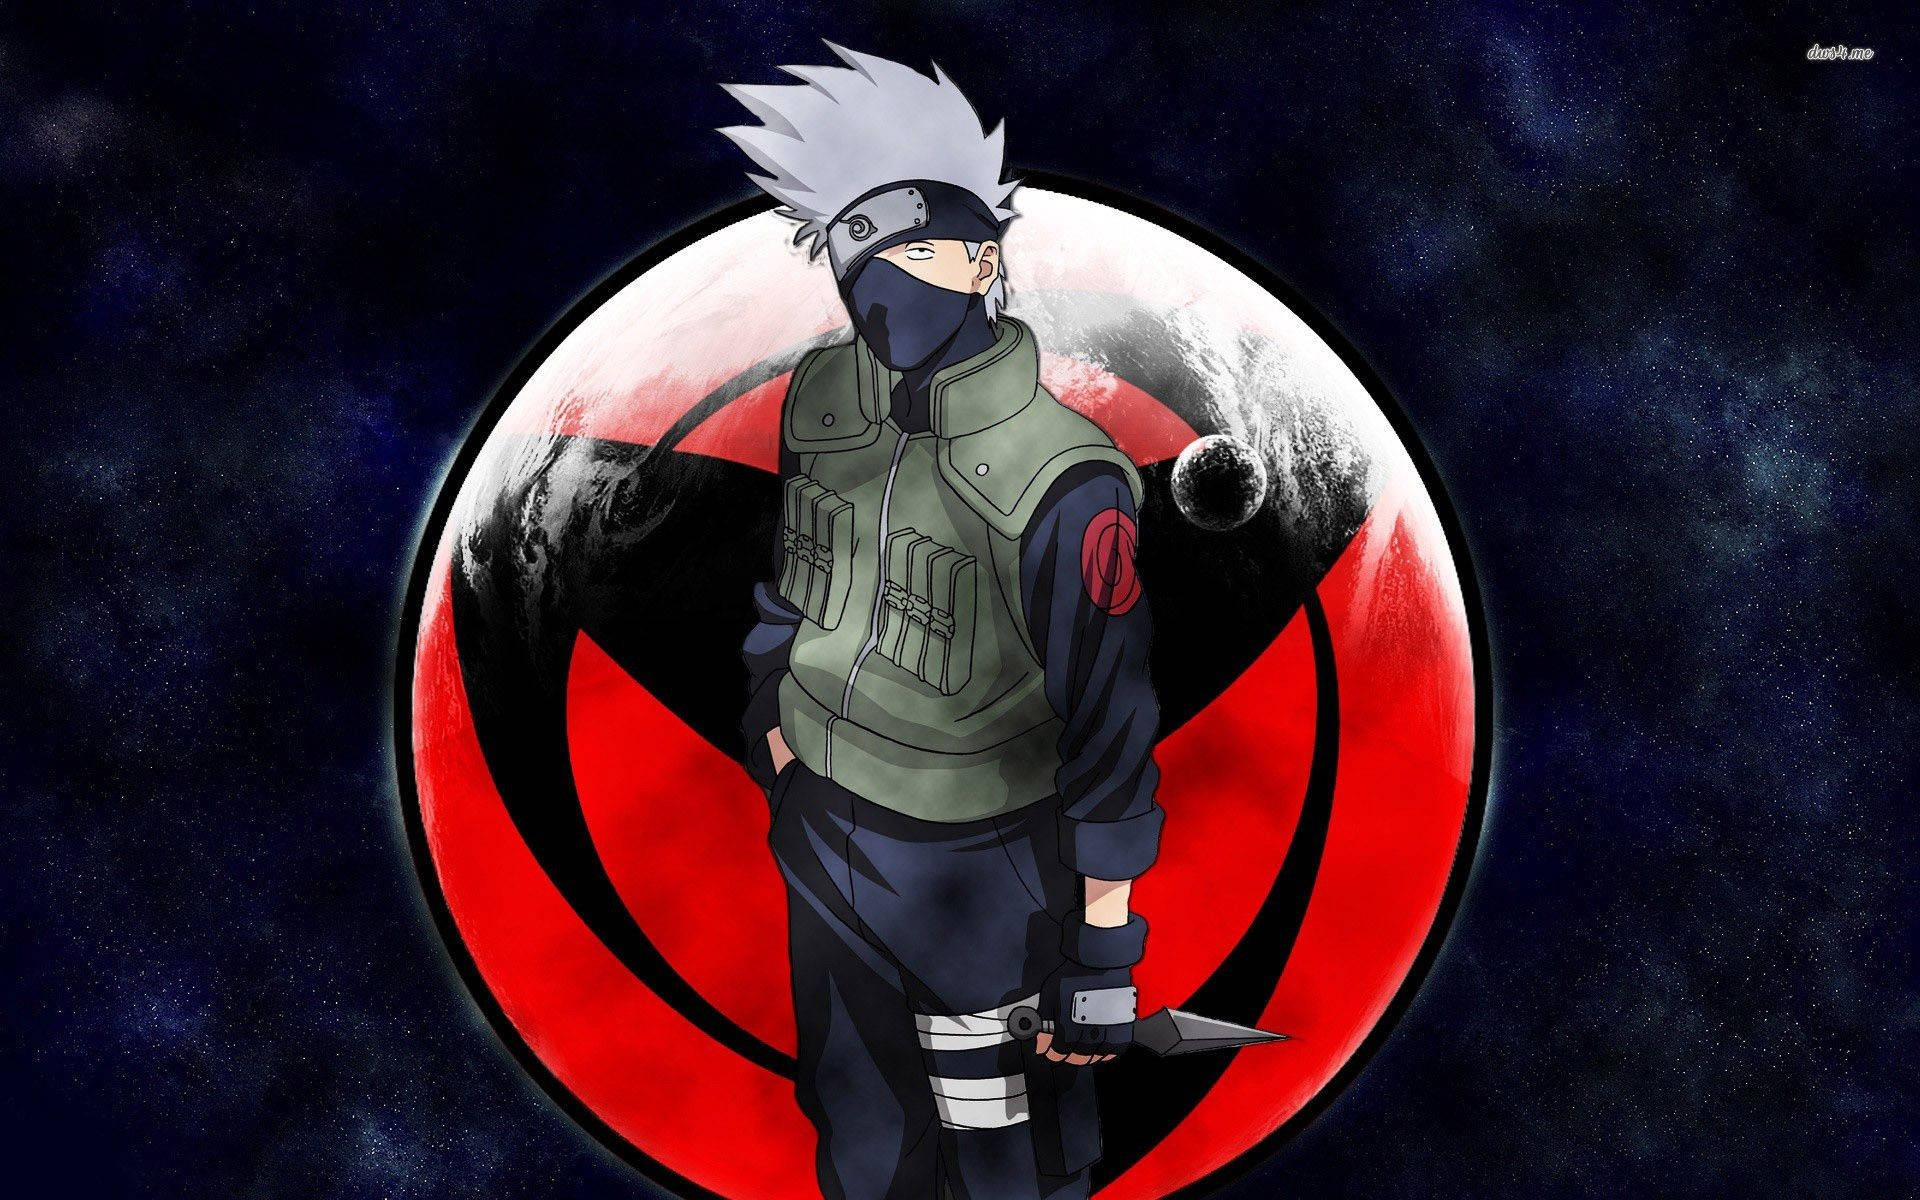 danny whiteley add photo show me a picture of kakashi